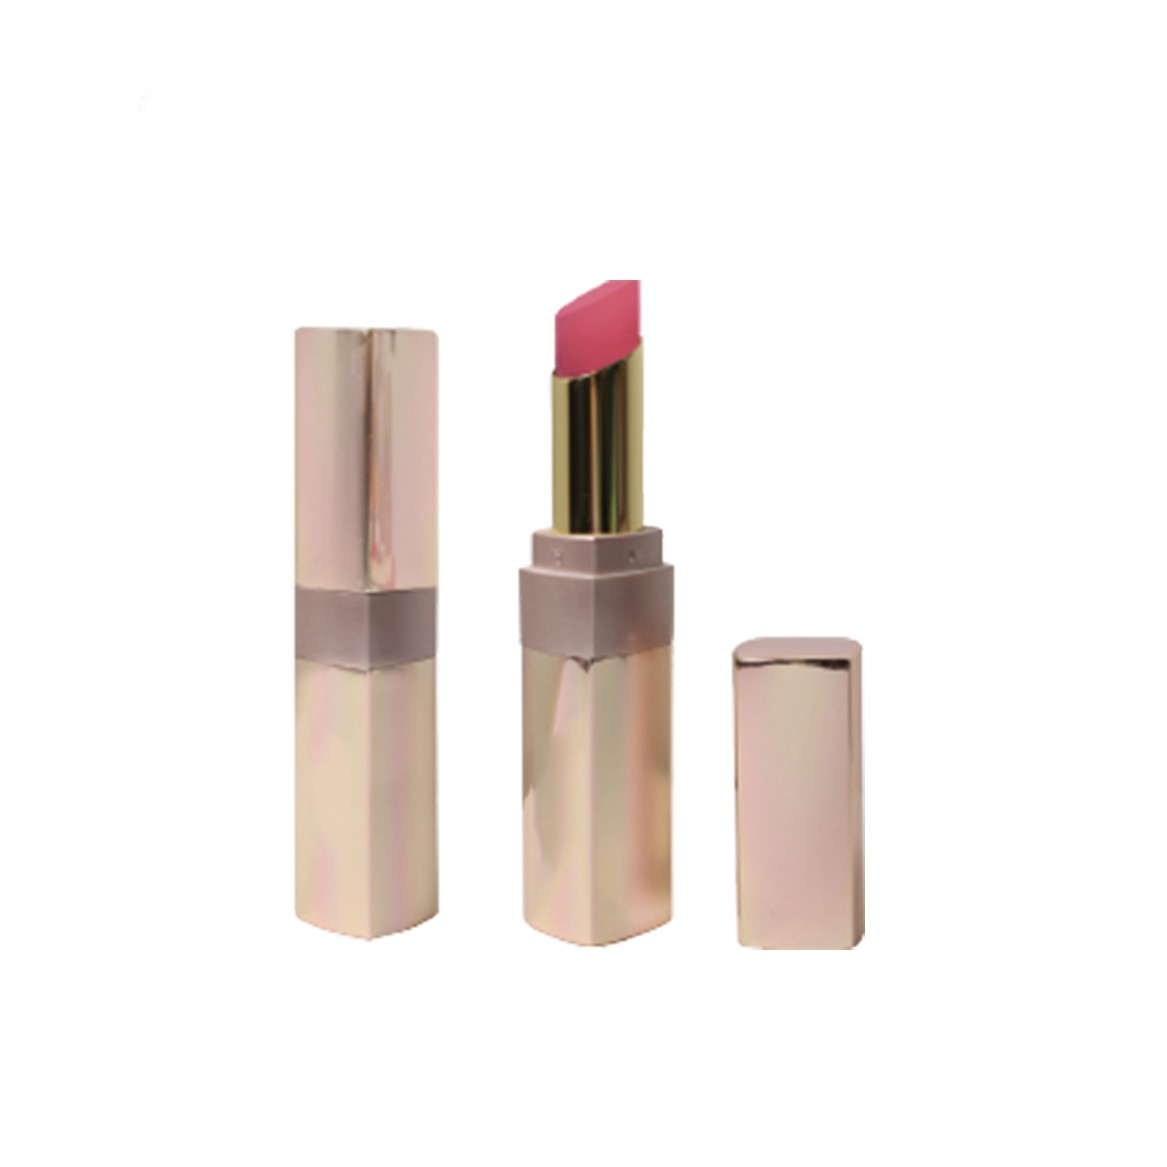 Limited edition Kiss Lip Balm Crayon, Hydrating Lip Moisturizer Infused with Natural Fruit Oils